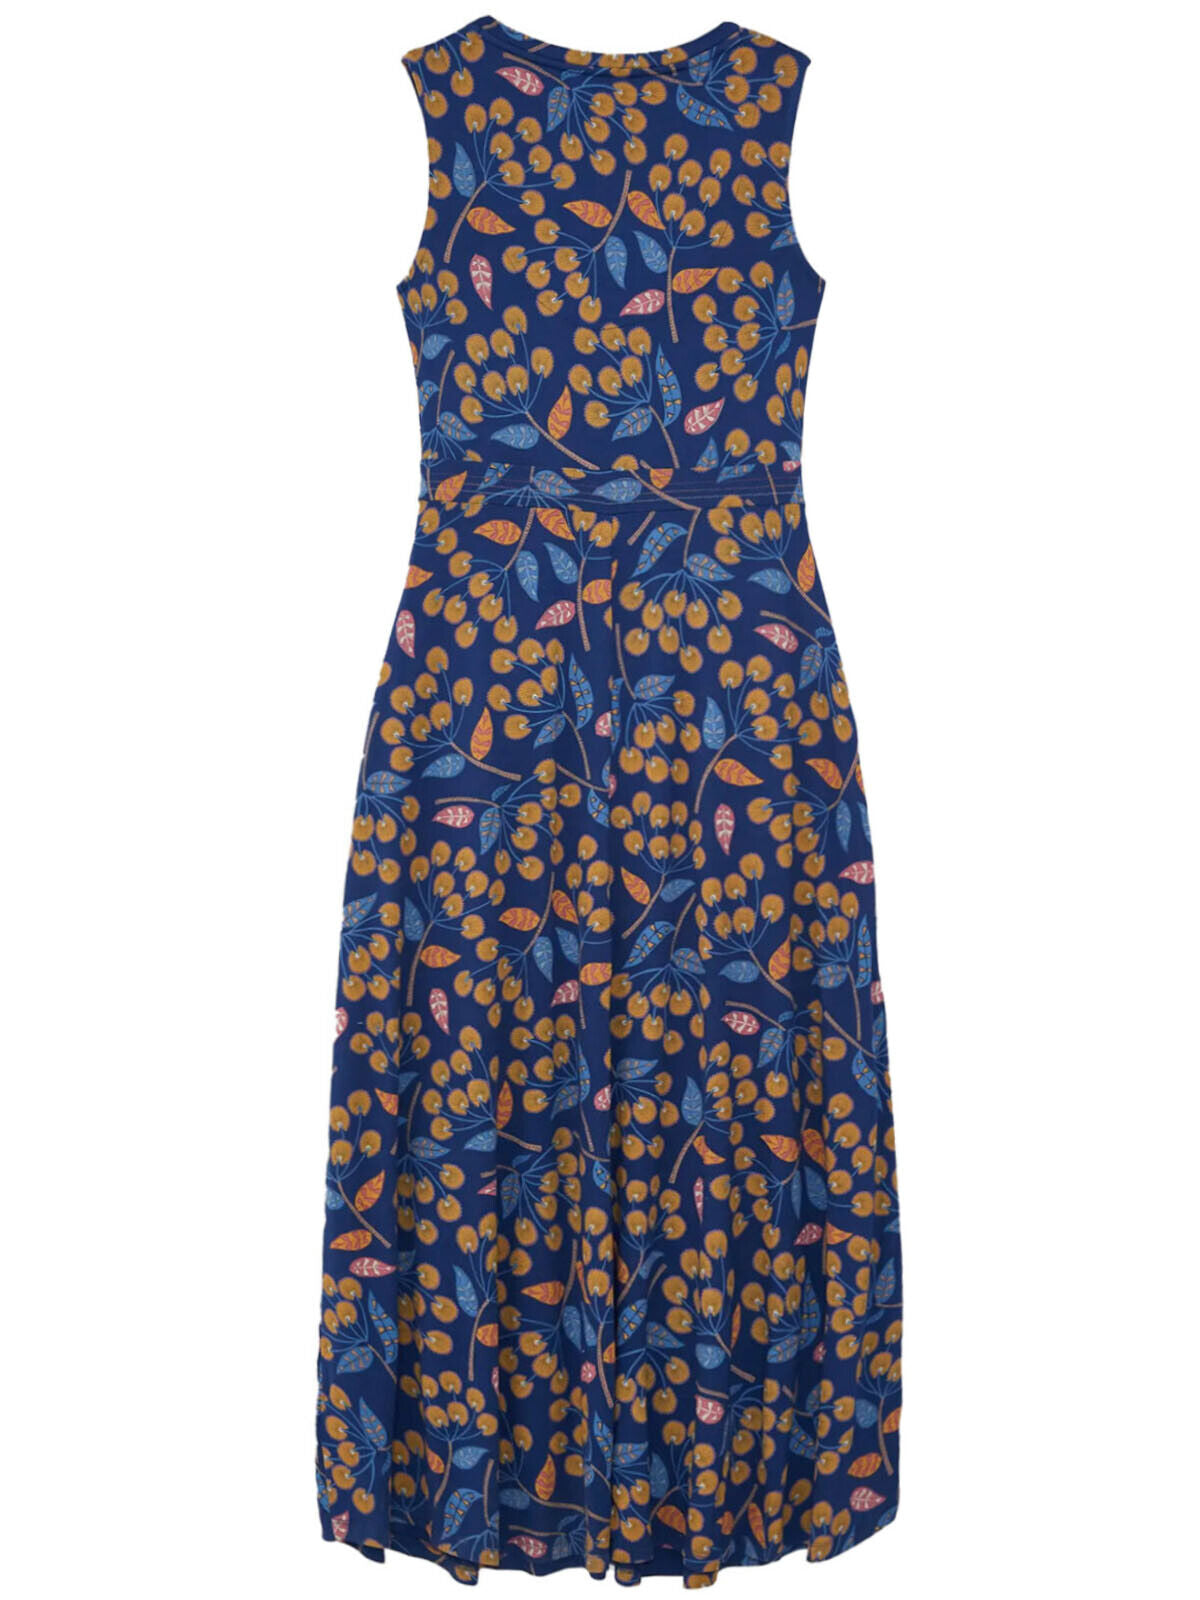 EX WHITE STUFF Blue Sophie Maxi Dress in Sizes 10, 12, 14, 16 RRP £59